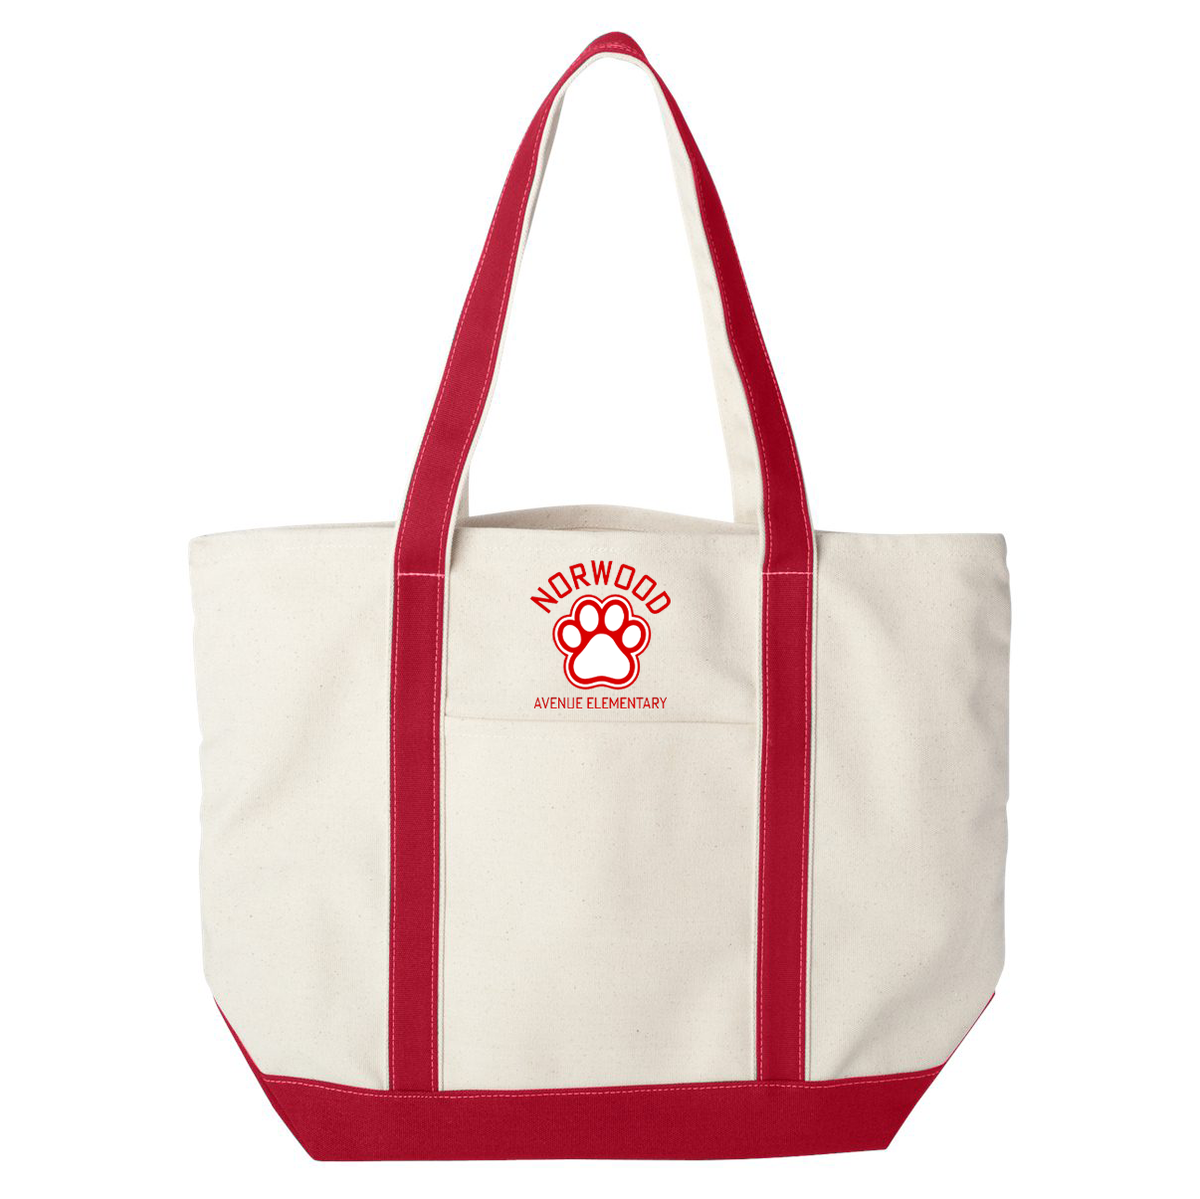 Norwood Ave. Elementary School X-Large Tote